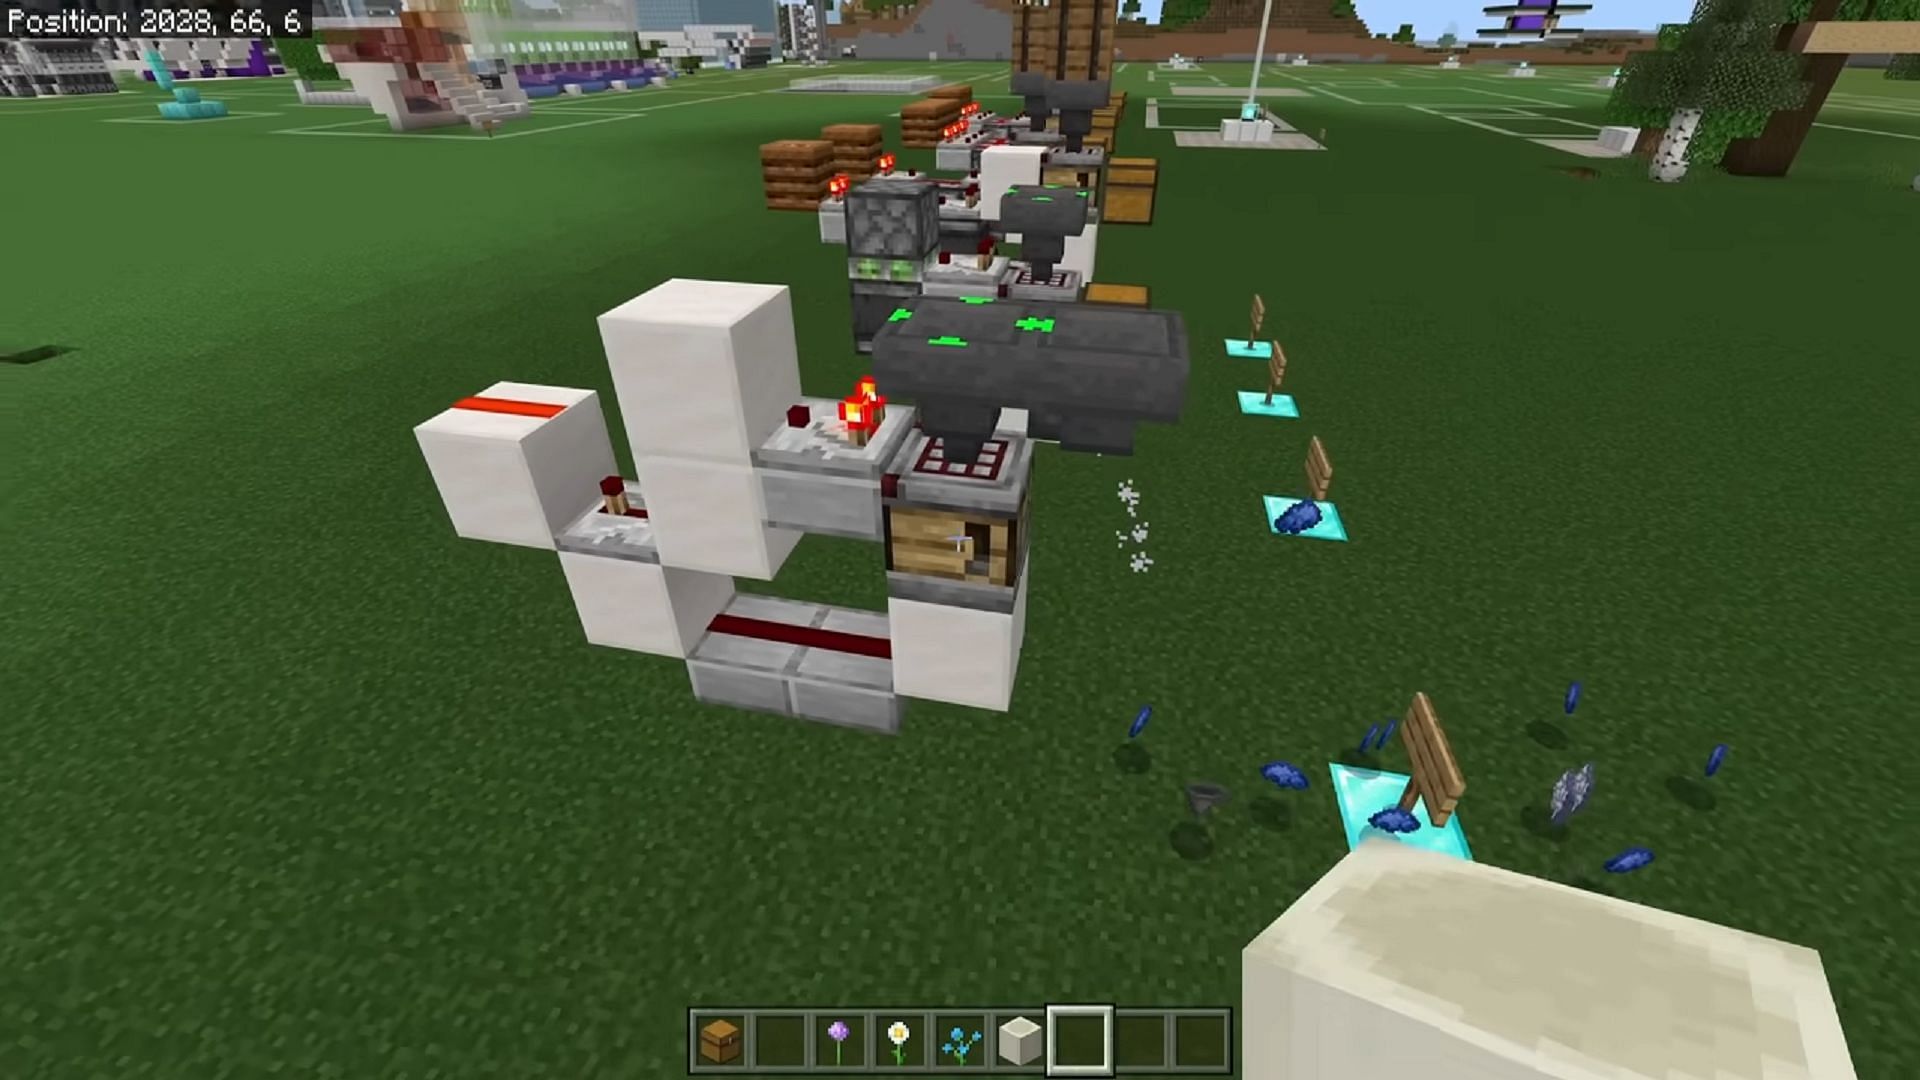 Combining flowers and blocks in a crafter can result in various dye colors being dispensed (Image via Silentwisperer/YouTube)